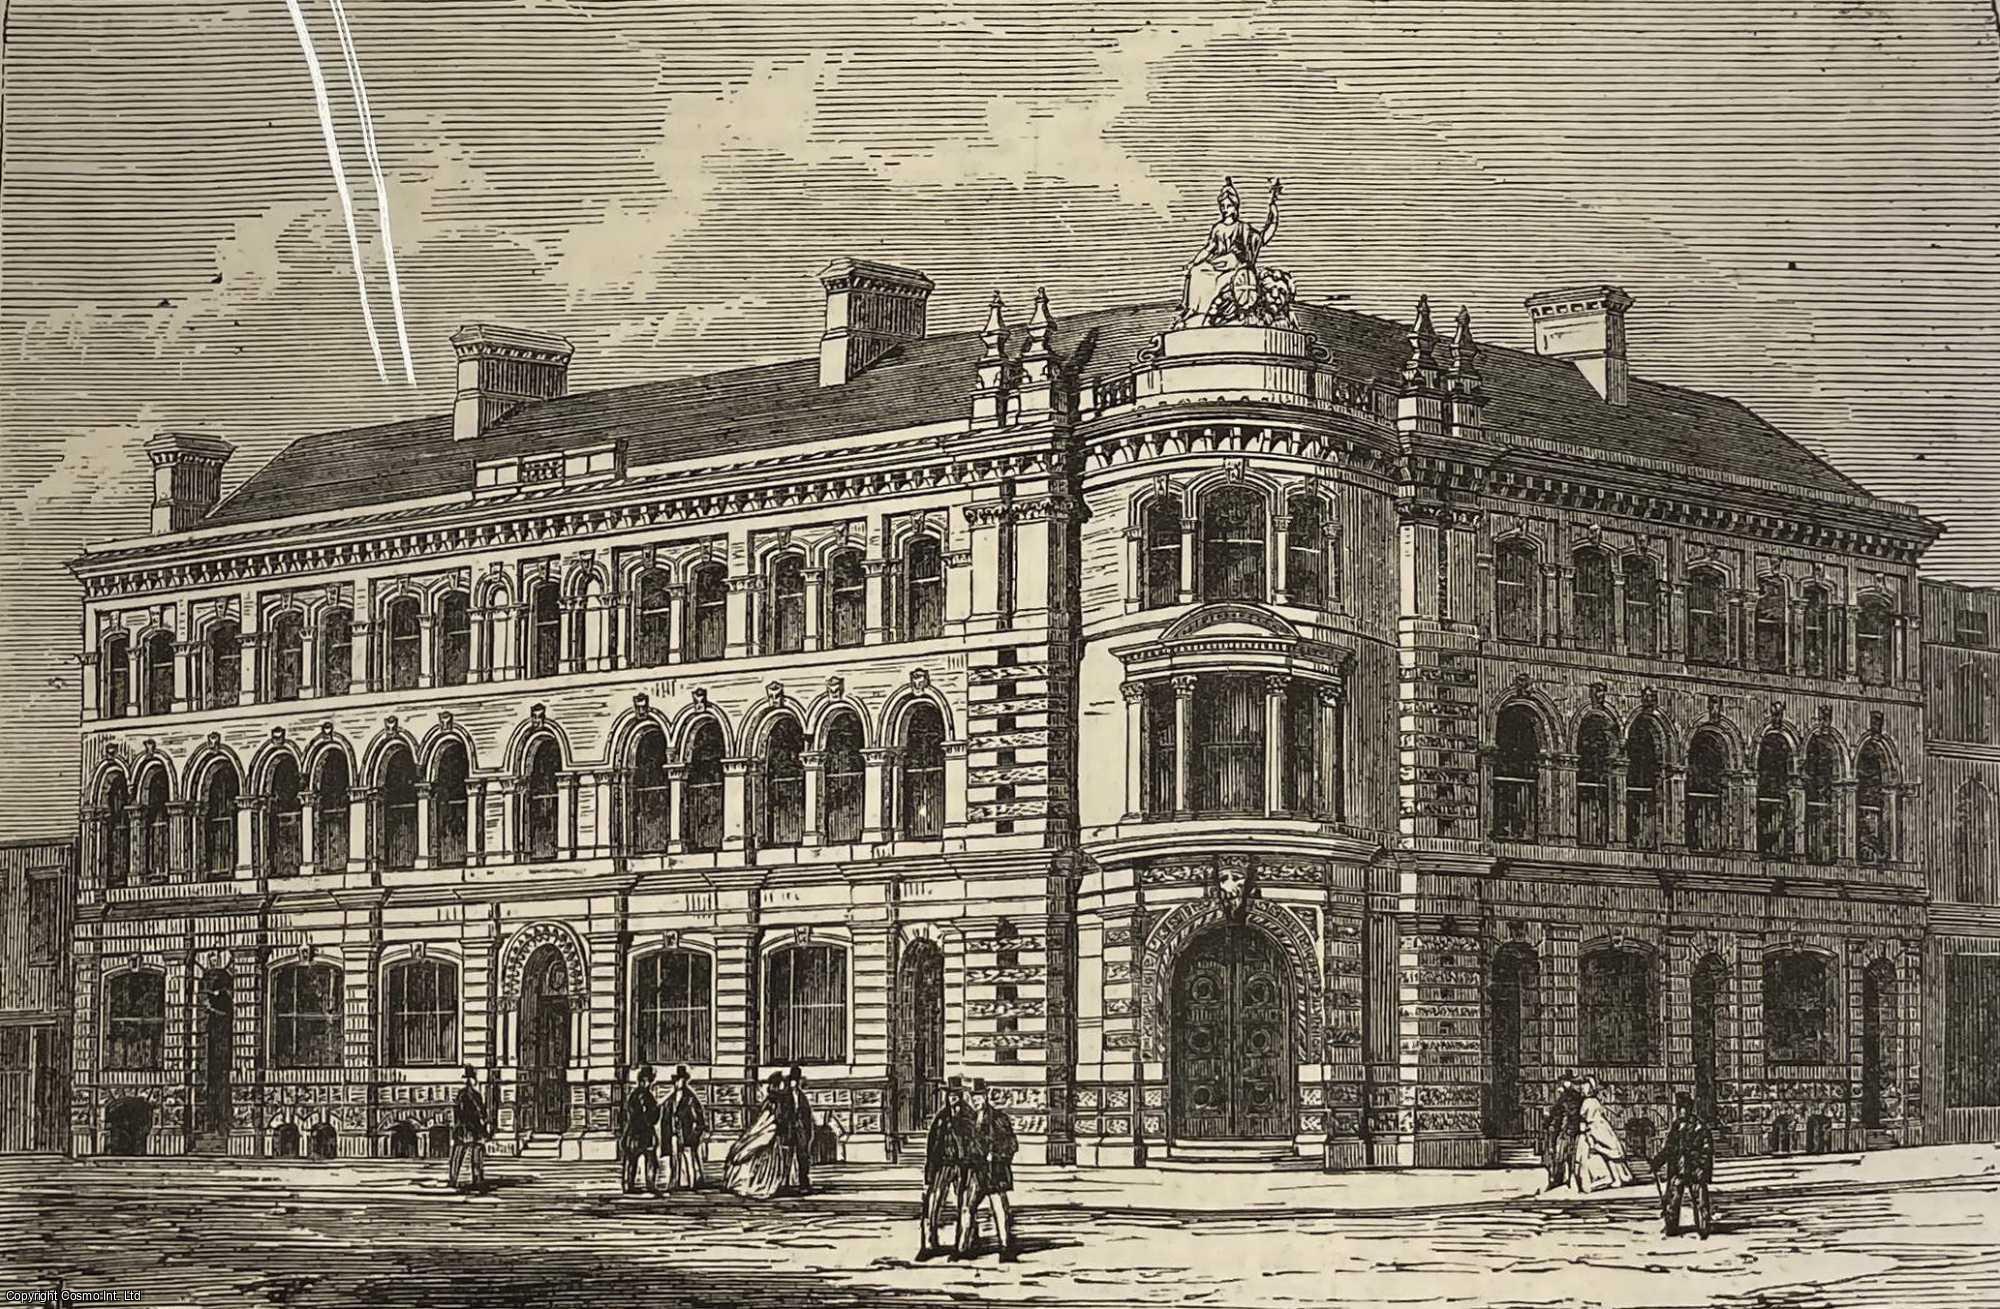 HULL - New Exchange Buildings, Hull. An original print from the Illustrated London News, 1866.